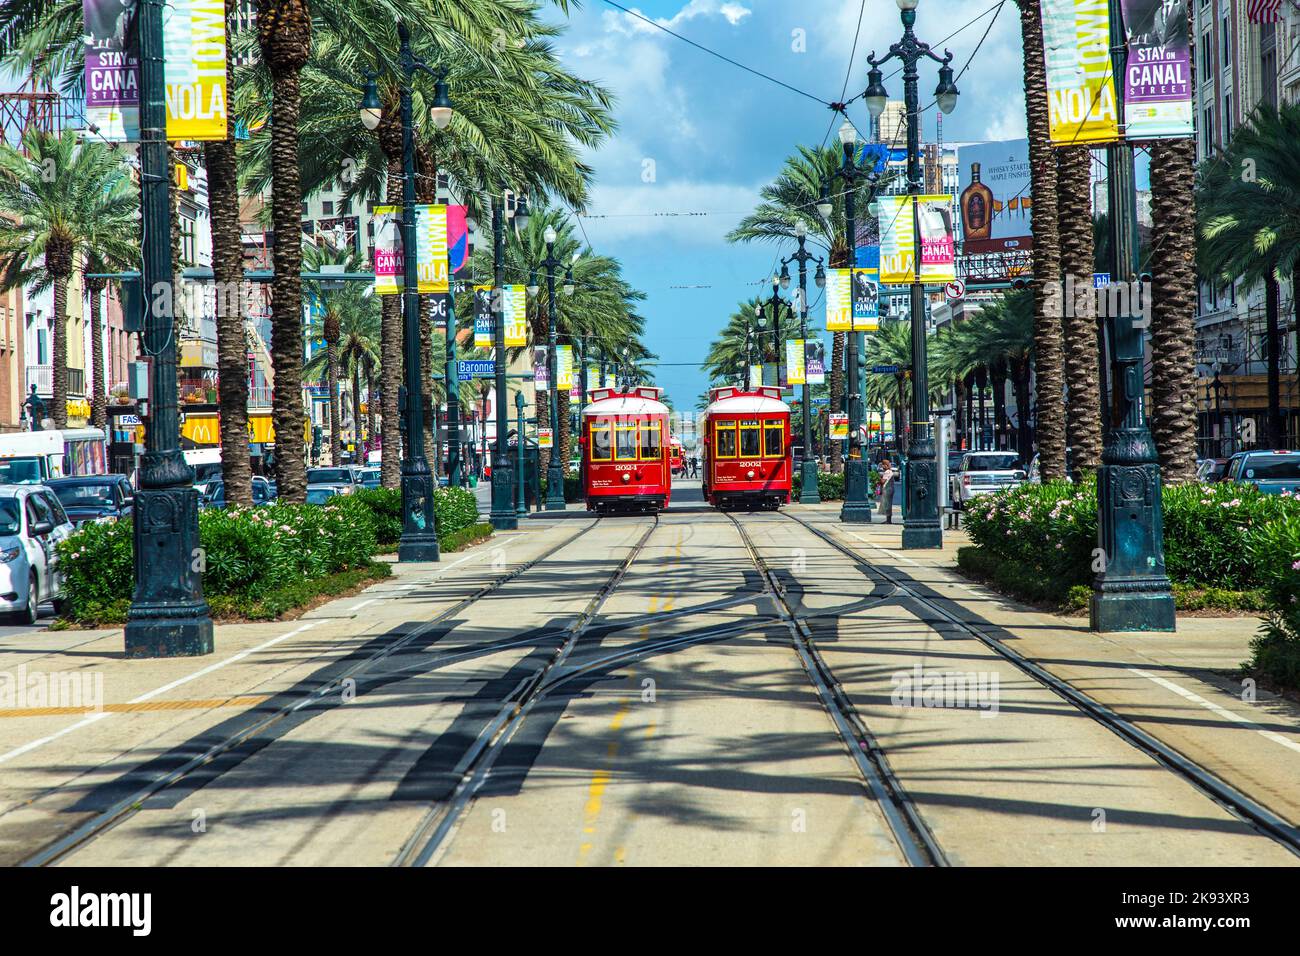 NEW ORLEANS, USA - JULY 17: New Orleans Streetcar Line, July 17, 2013. Newly revamped after Hurricane Katrina in 2005, the New Orleans Streetcar line Stock Photo